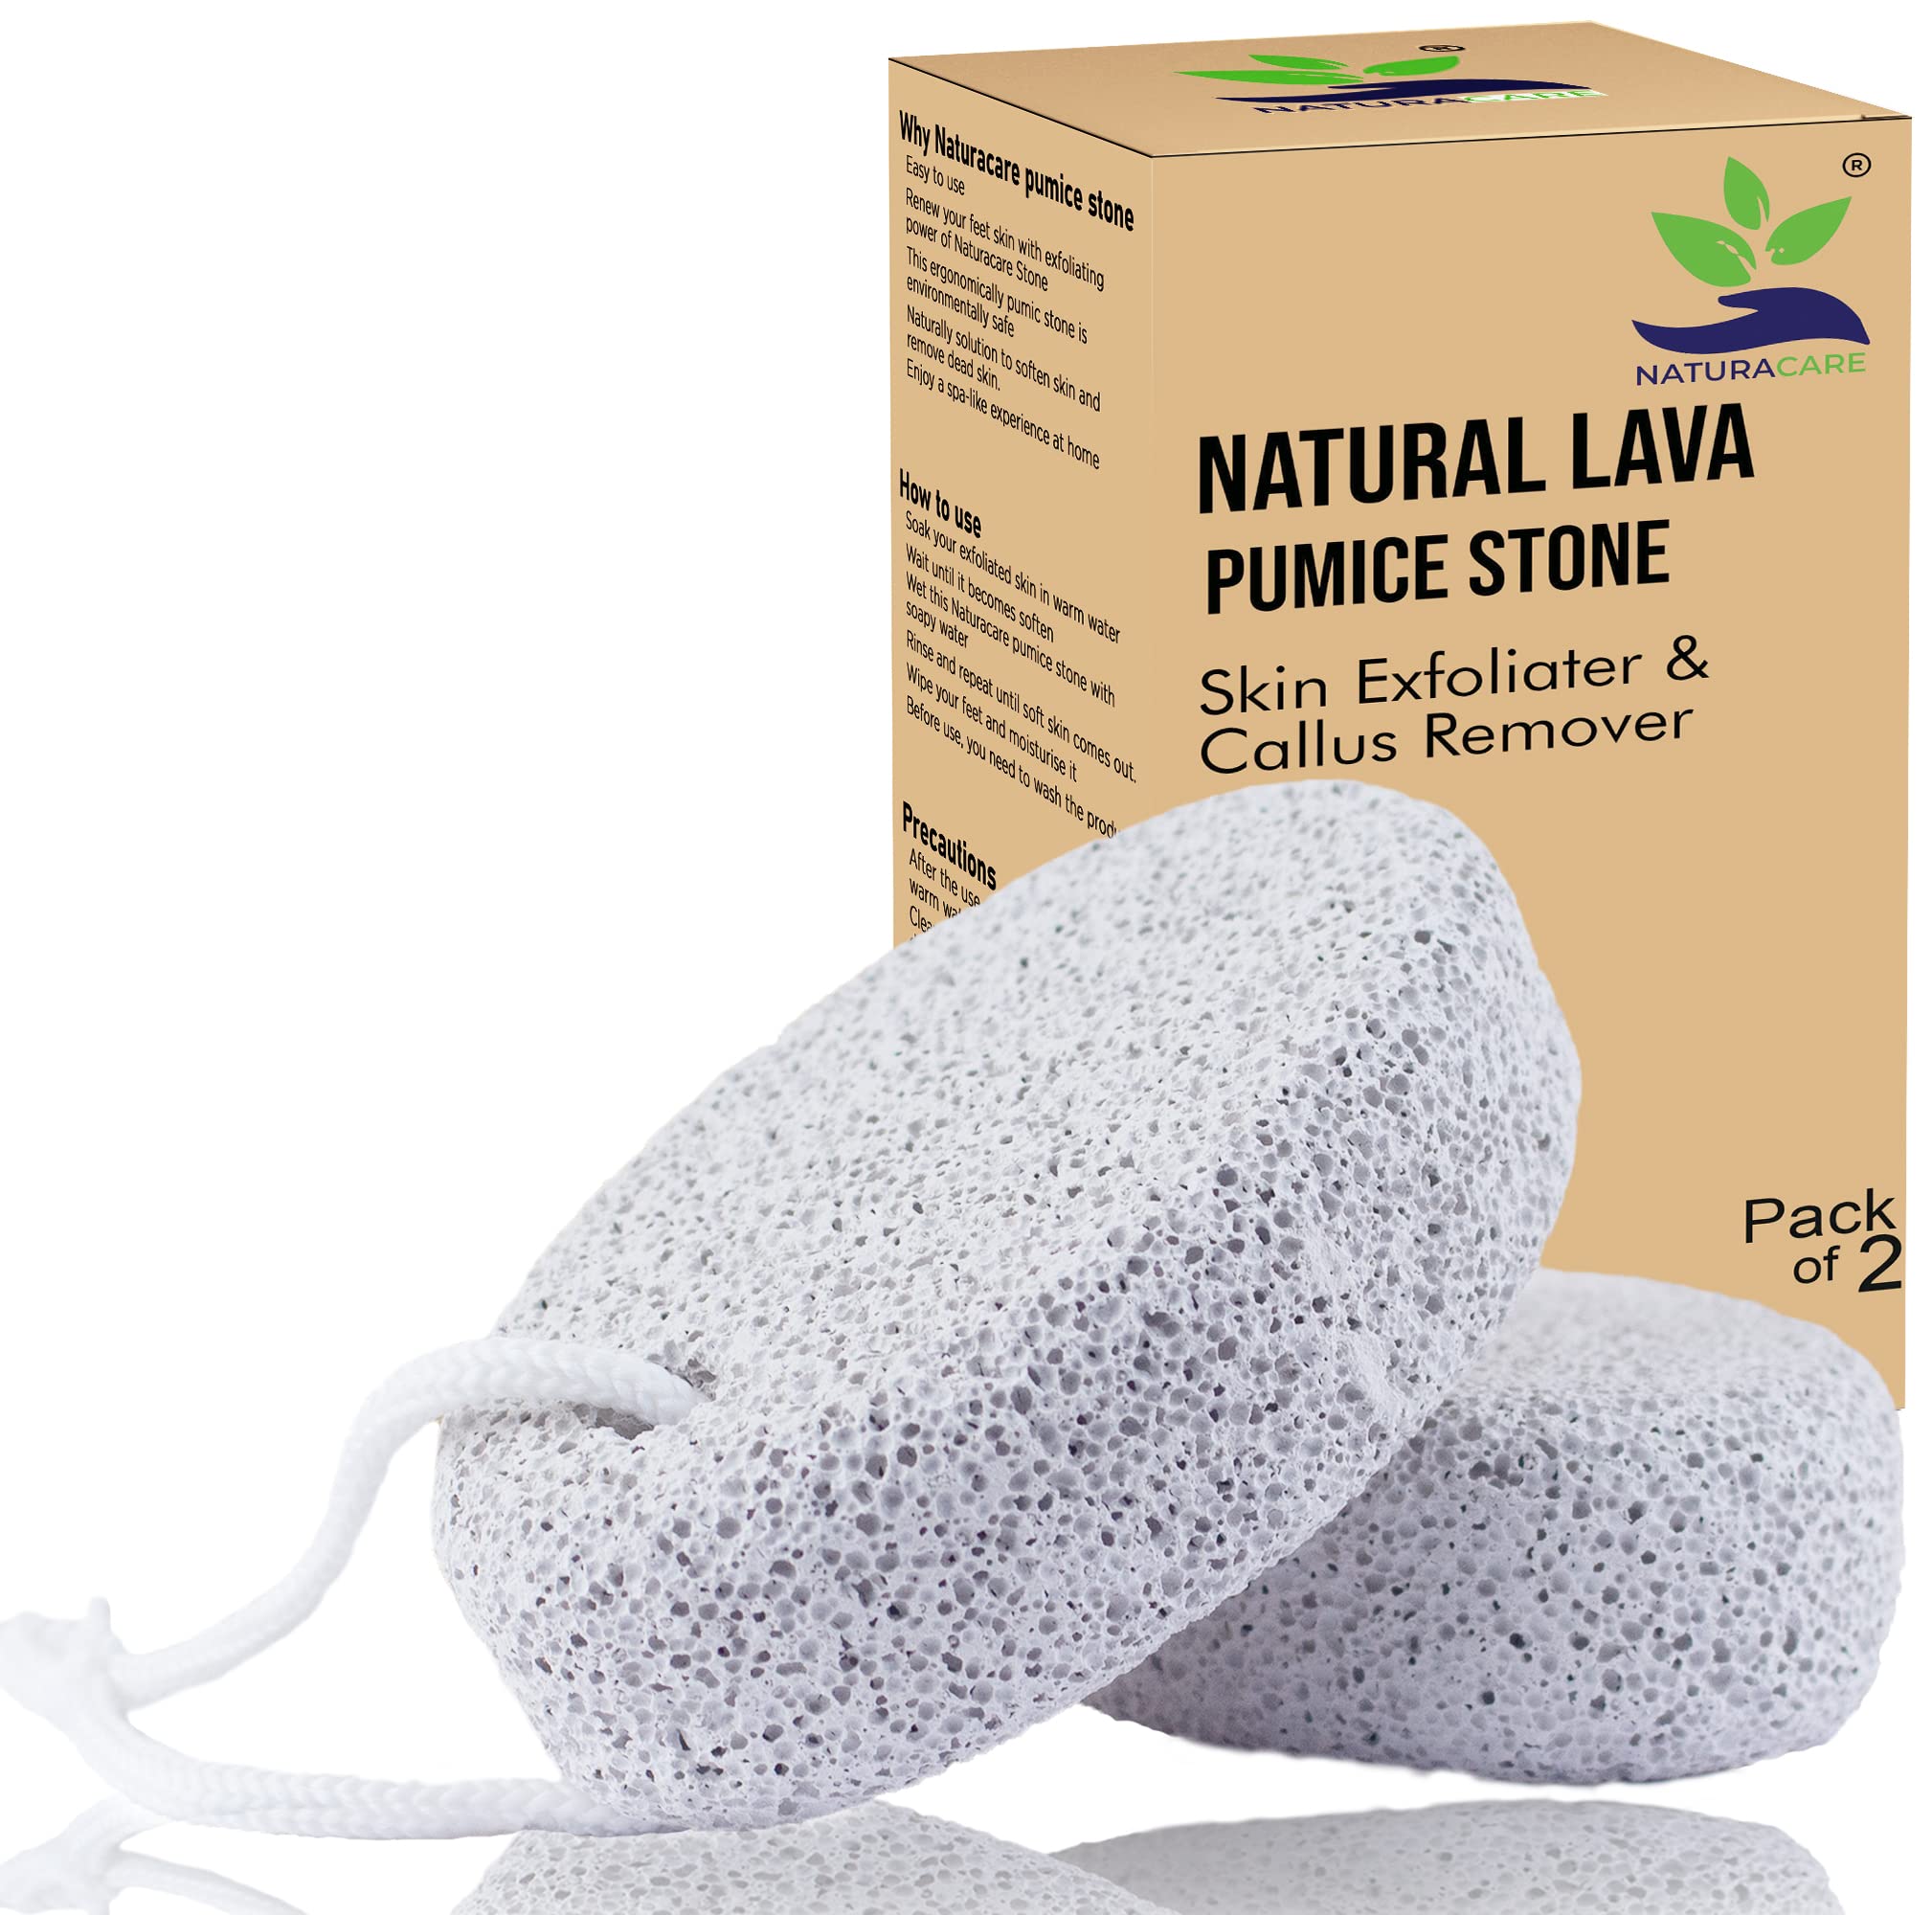 Naturacare Pumice Stone 2Pcs, Natural Lava Foot Scrubber Pumice Stone for feet/Hands/Body, Natural Foot File Men/Women and Hard Skin Callus Remover for Skin Exfoliation